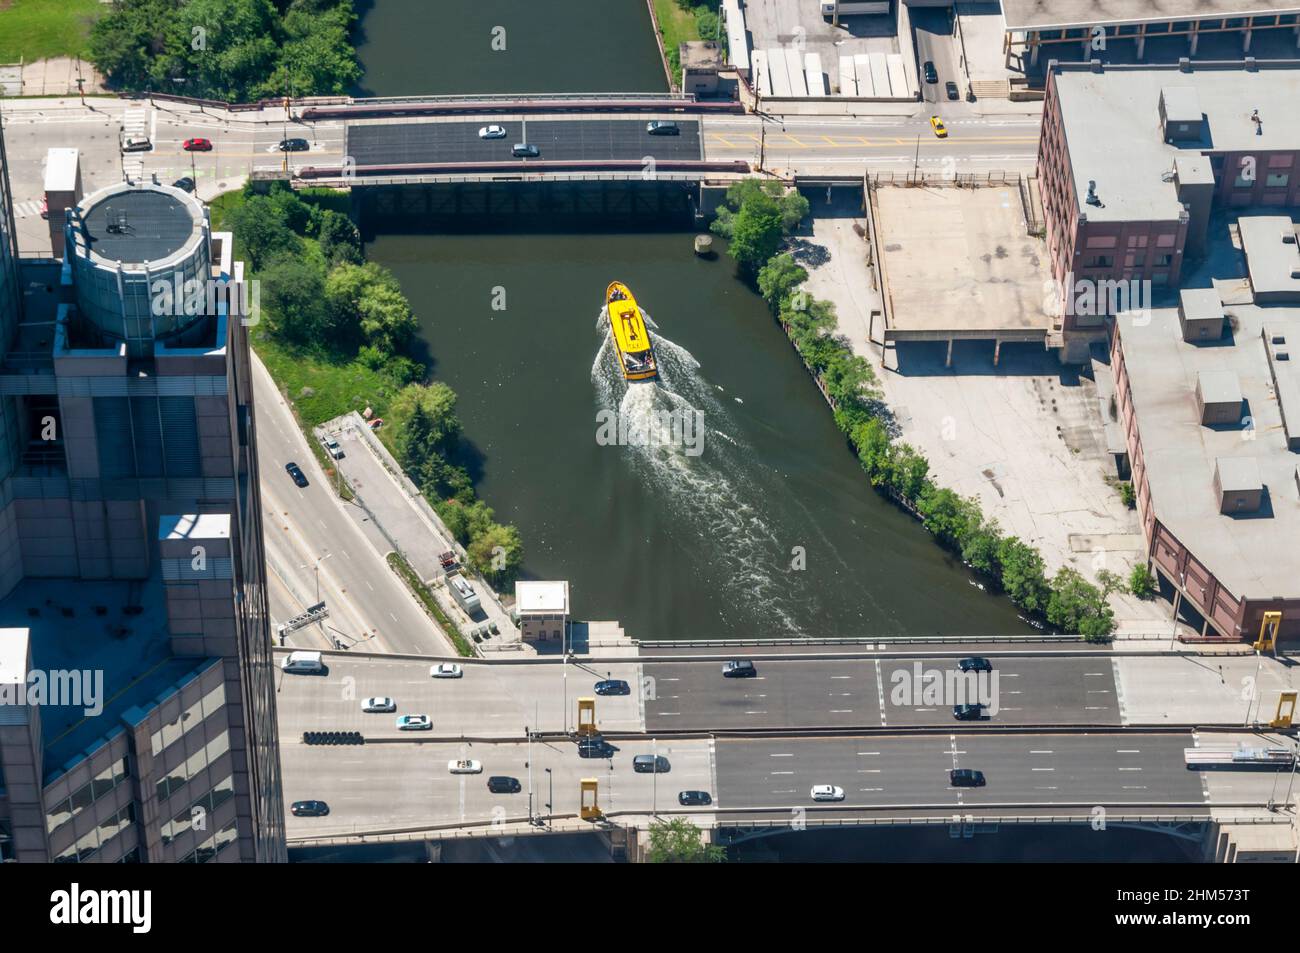 Aerial view of yellow water taxi on southern branch of the Chicago River between the bridges of the Dwight D Eisenhower Expressway & West Harrison St. Stock Photo